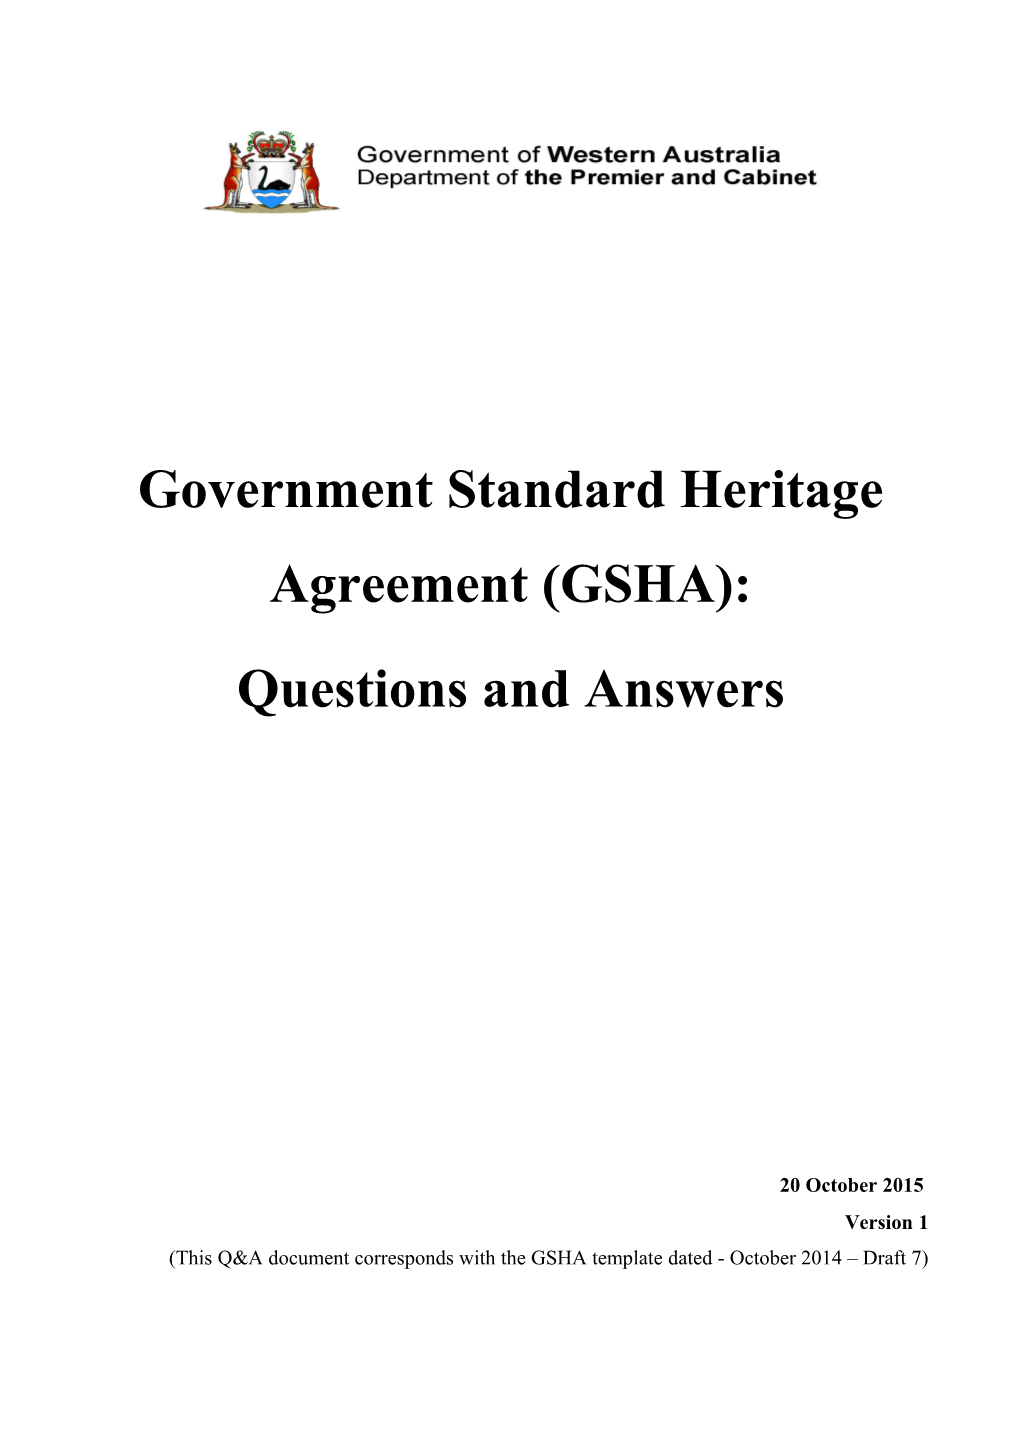 Government Standard Heritage Agreement - Questions and Answers